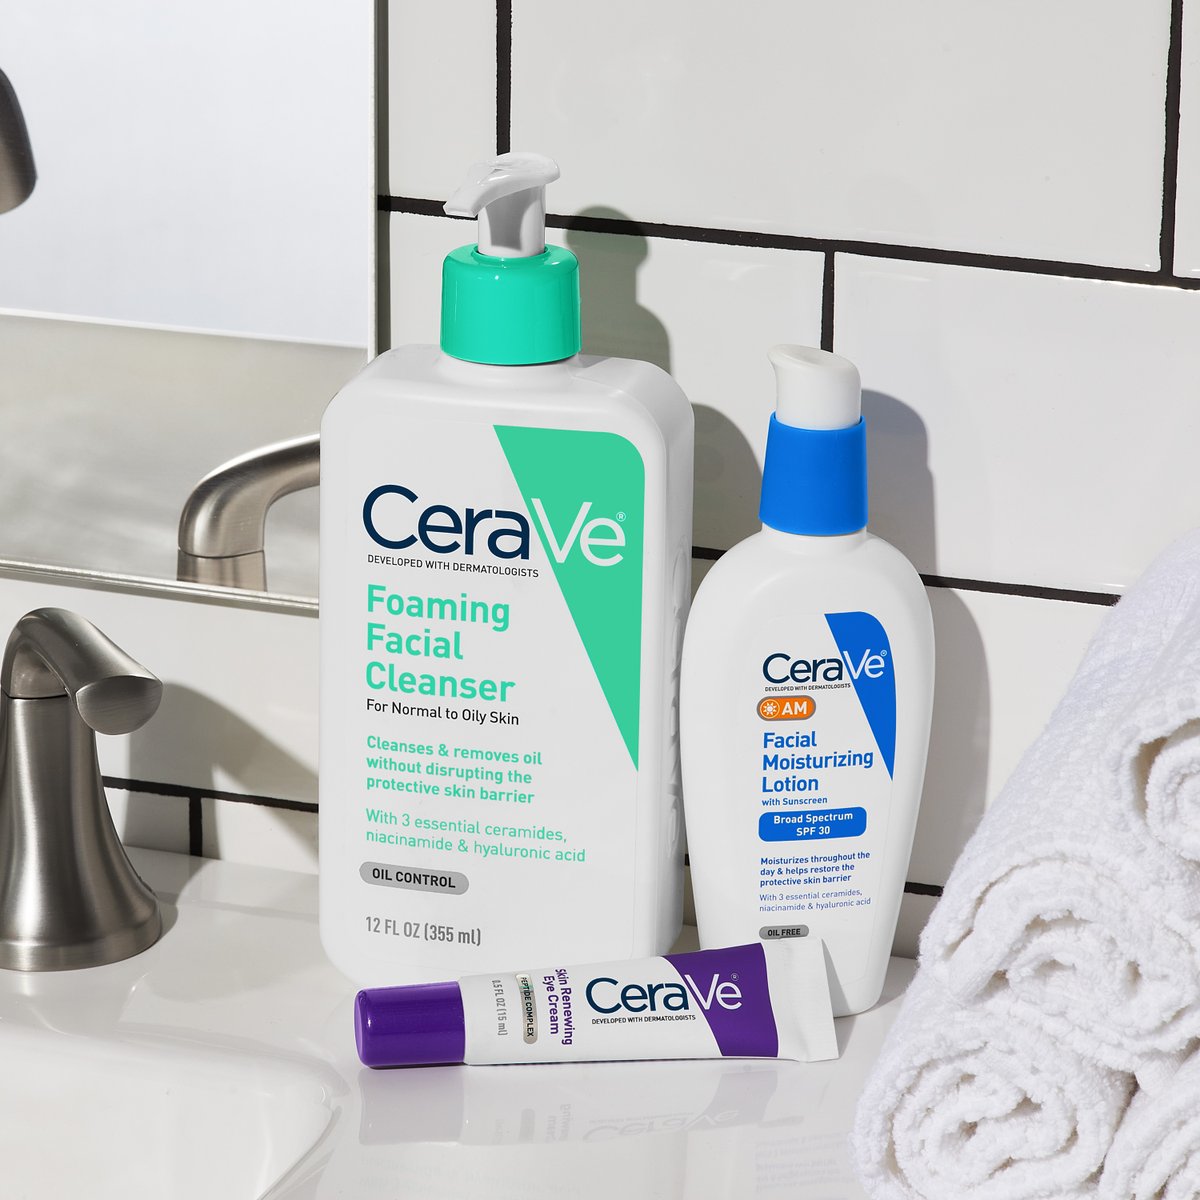 Adding an anti-aging eye cream to your skincare routine is a great way to help minimize visible signs of aging! Follow our 3️⃣ step morning routine: 1️⃣ Foaming Facial Cleanser 2️⃣ Skin Renewing Eye Cream 3️⃣ AM Facial Moisturizing Lotion SPF 30 #CeraVe #DevelopedWithDerms